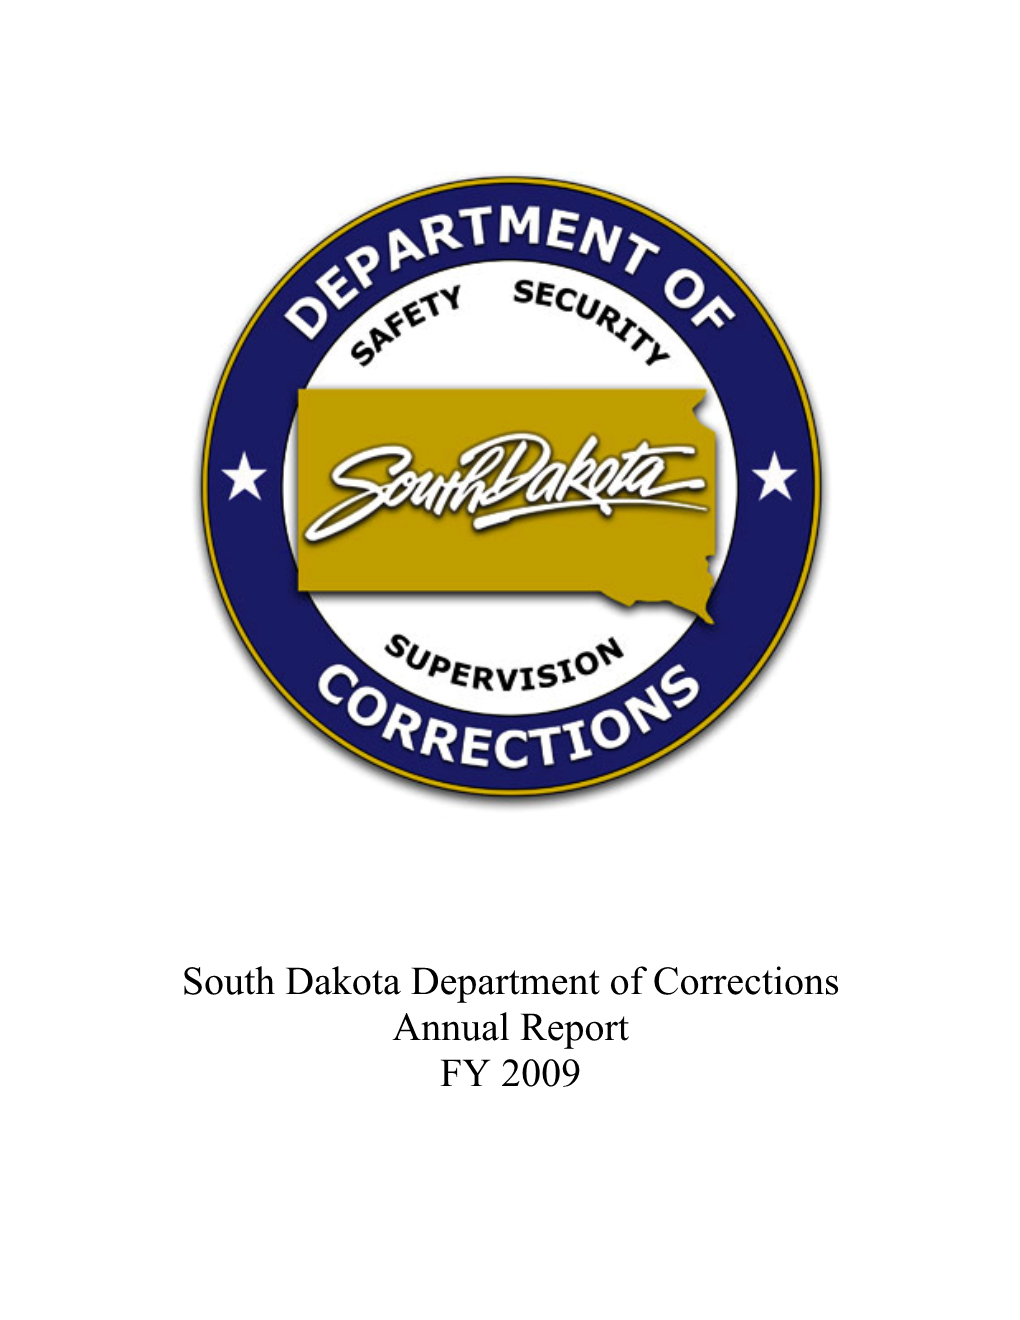 South Dakota Department of Corrections Annual Report FY 2009